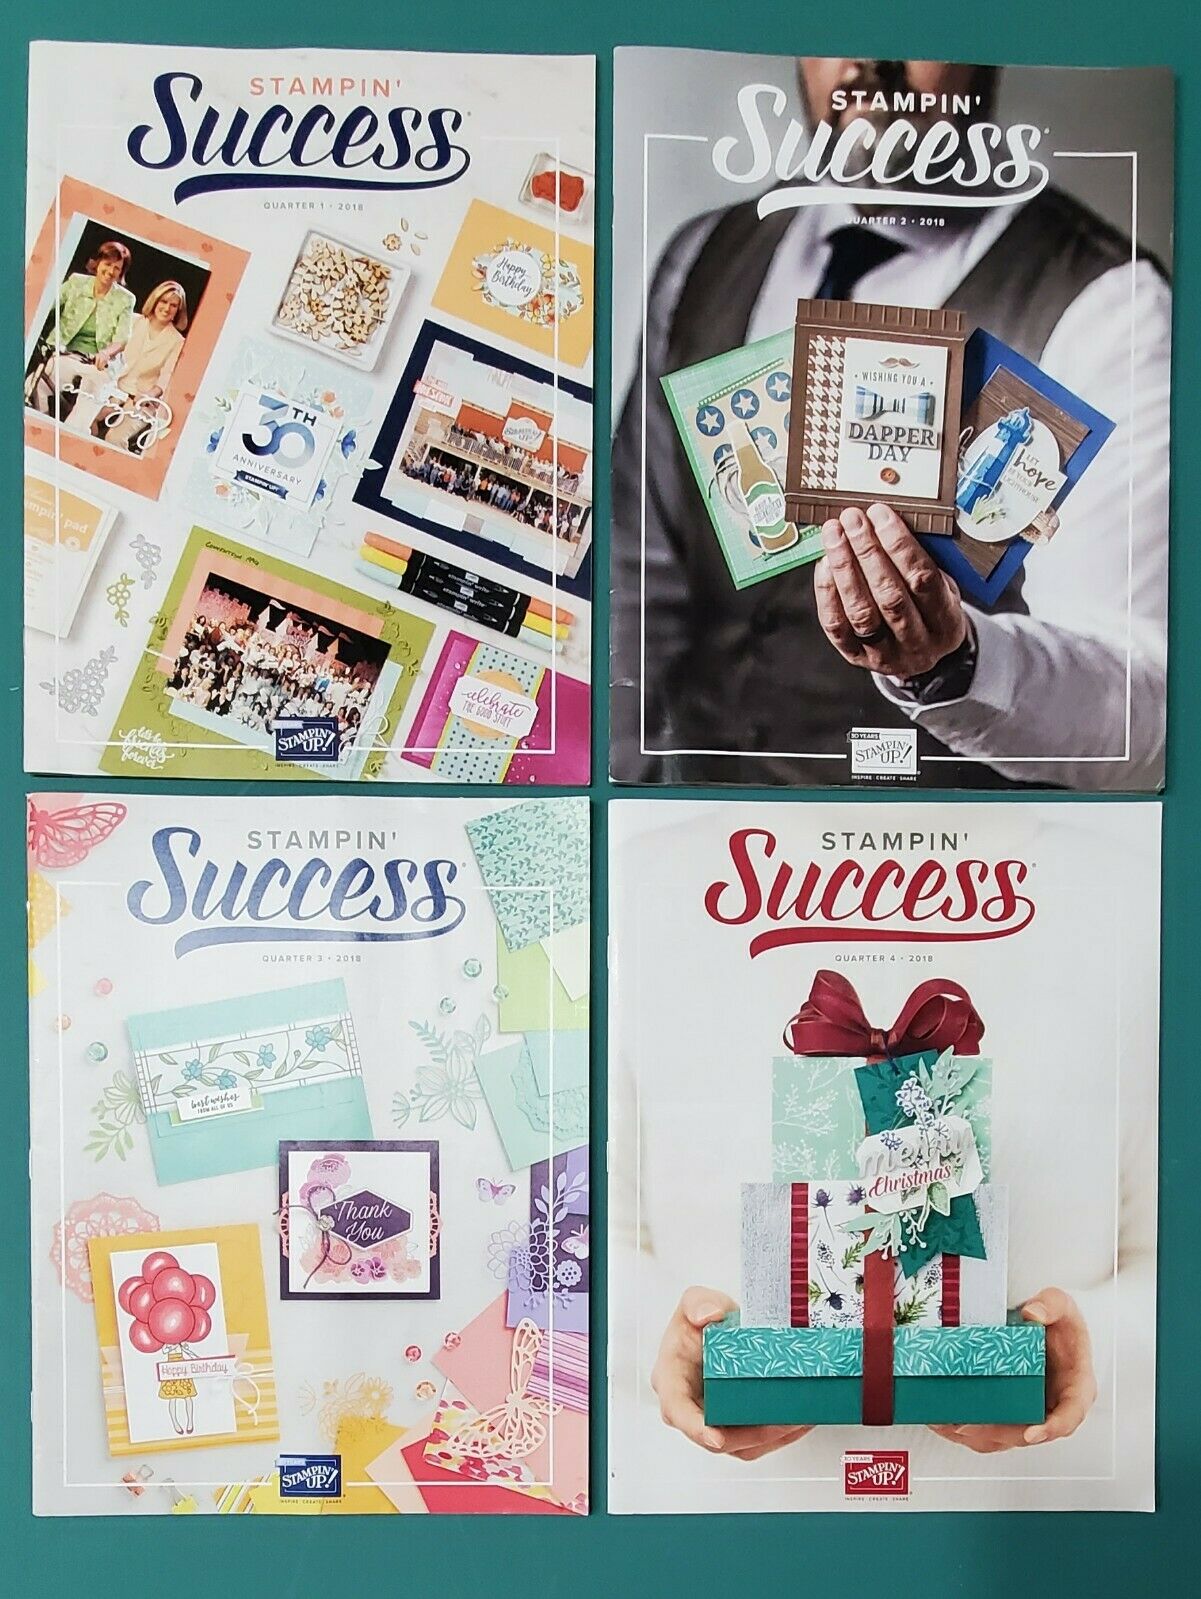 Stampin Up Lot - 4 Magazines From 2018 - Success Stamping Techniques Craft Ideas